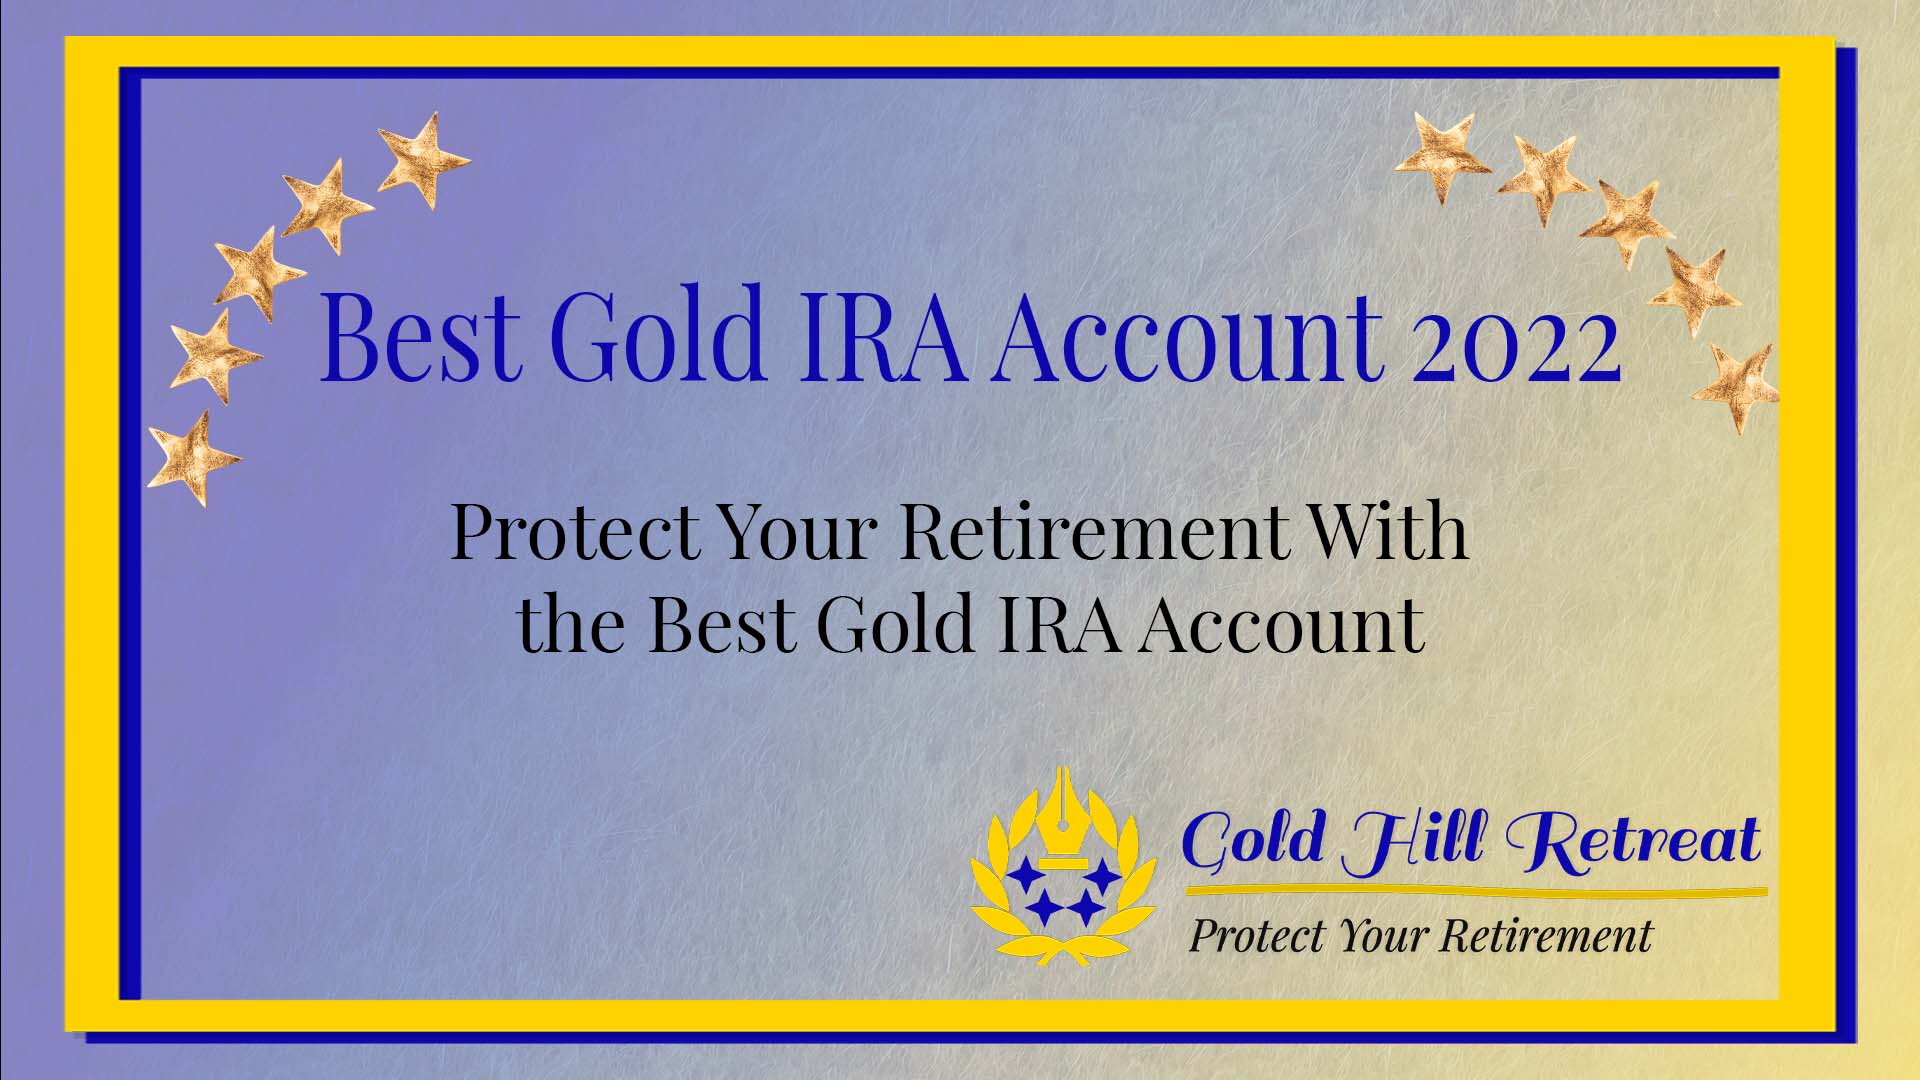 The Best Gold IRA Account 2022- Protect Your Retirement With The Best Gold IRA